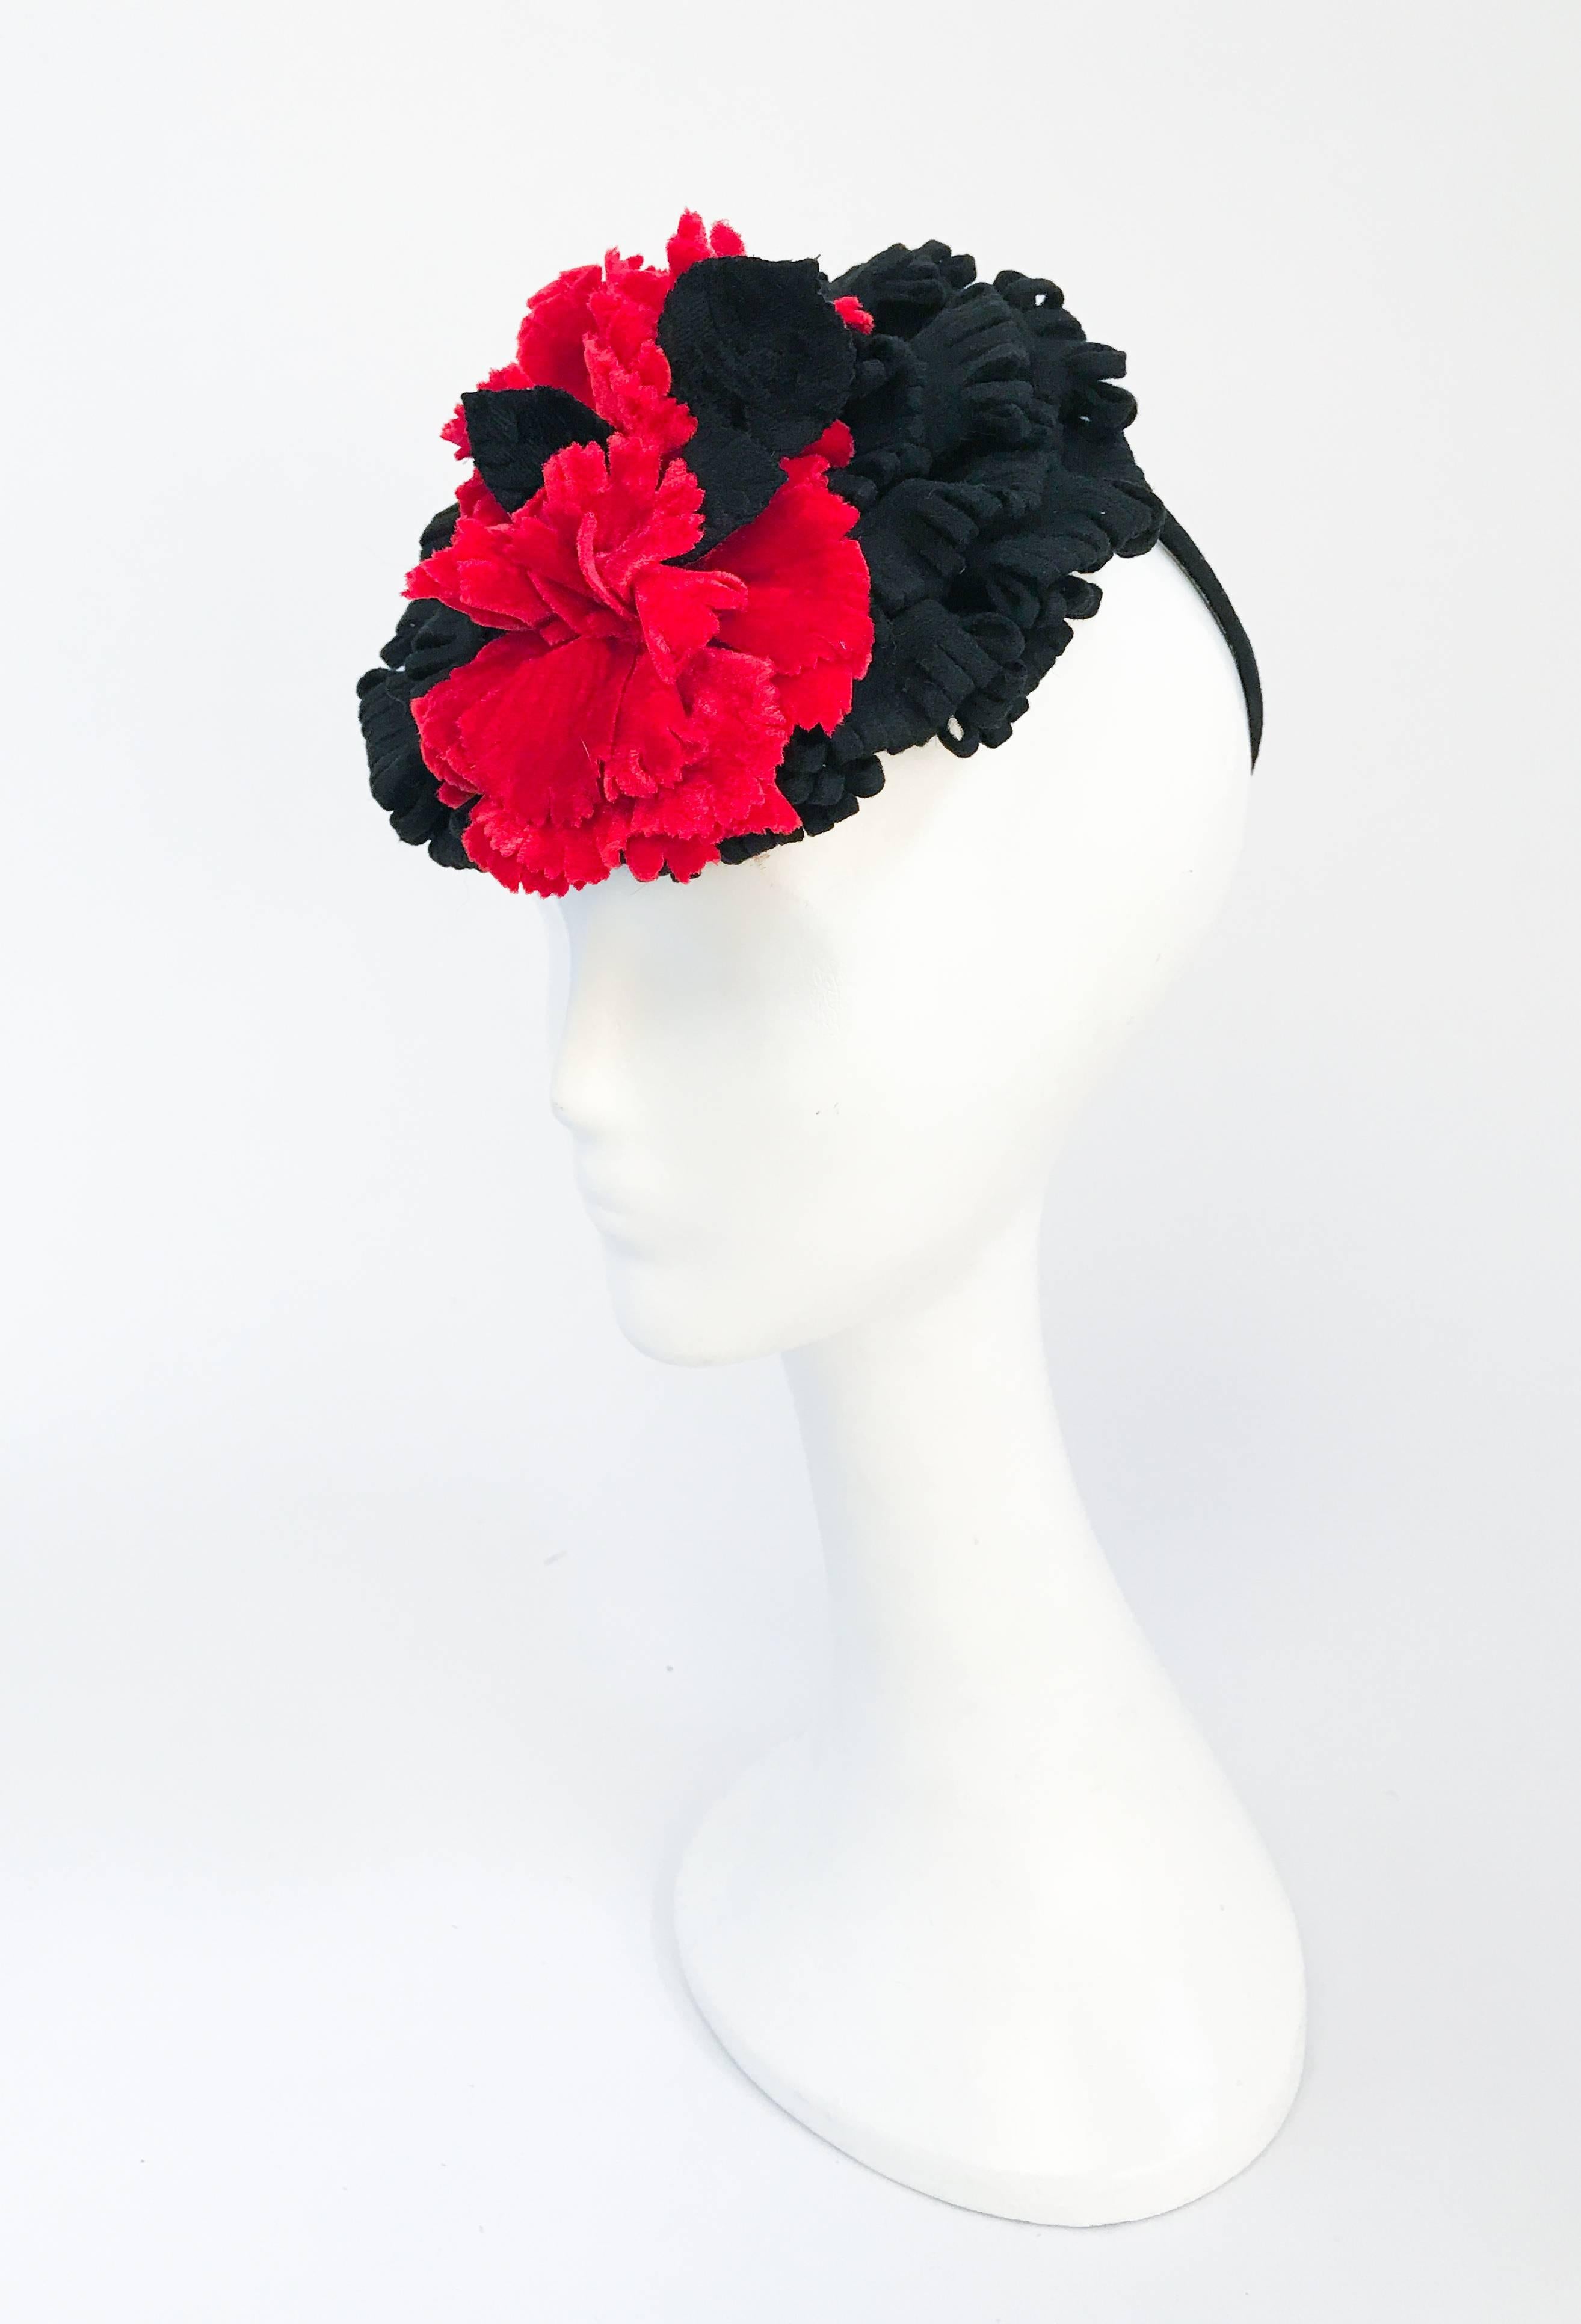 This exquisite handmade 1940s Black and Red Cocktail hat has red and black hand cut scalloped velvet accents. The body of the hat is made of a black fur felt. It has the original covered security loop for the back of the head meaning it can be worn